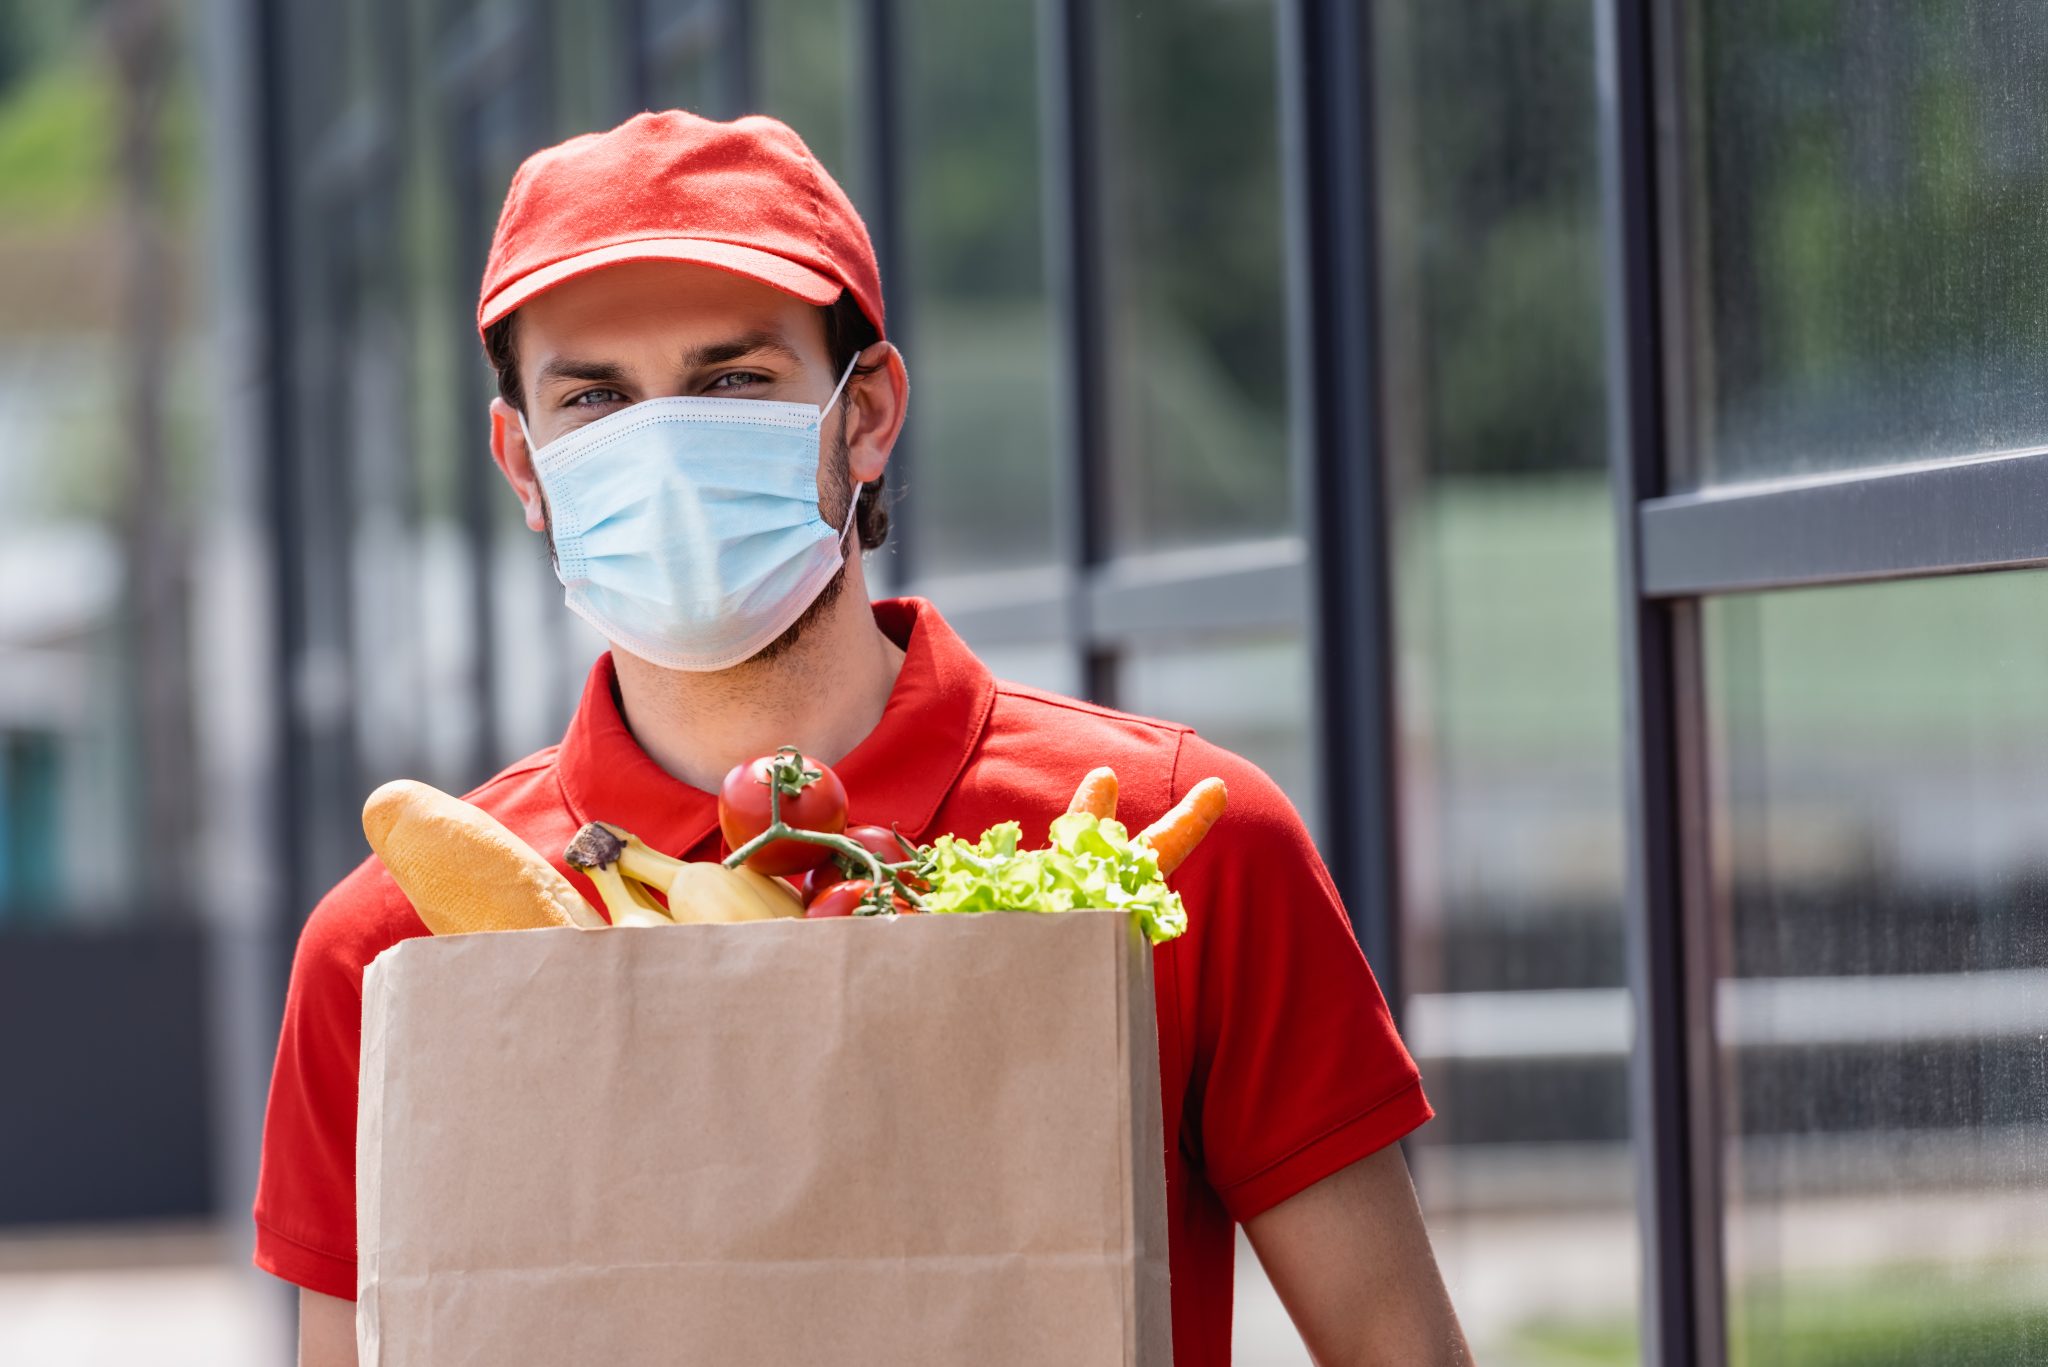 Courier in medical mask holding shopping bag with fresh vegetables on urban street